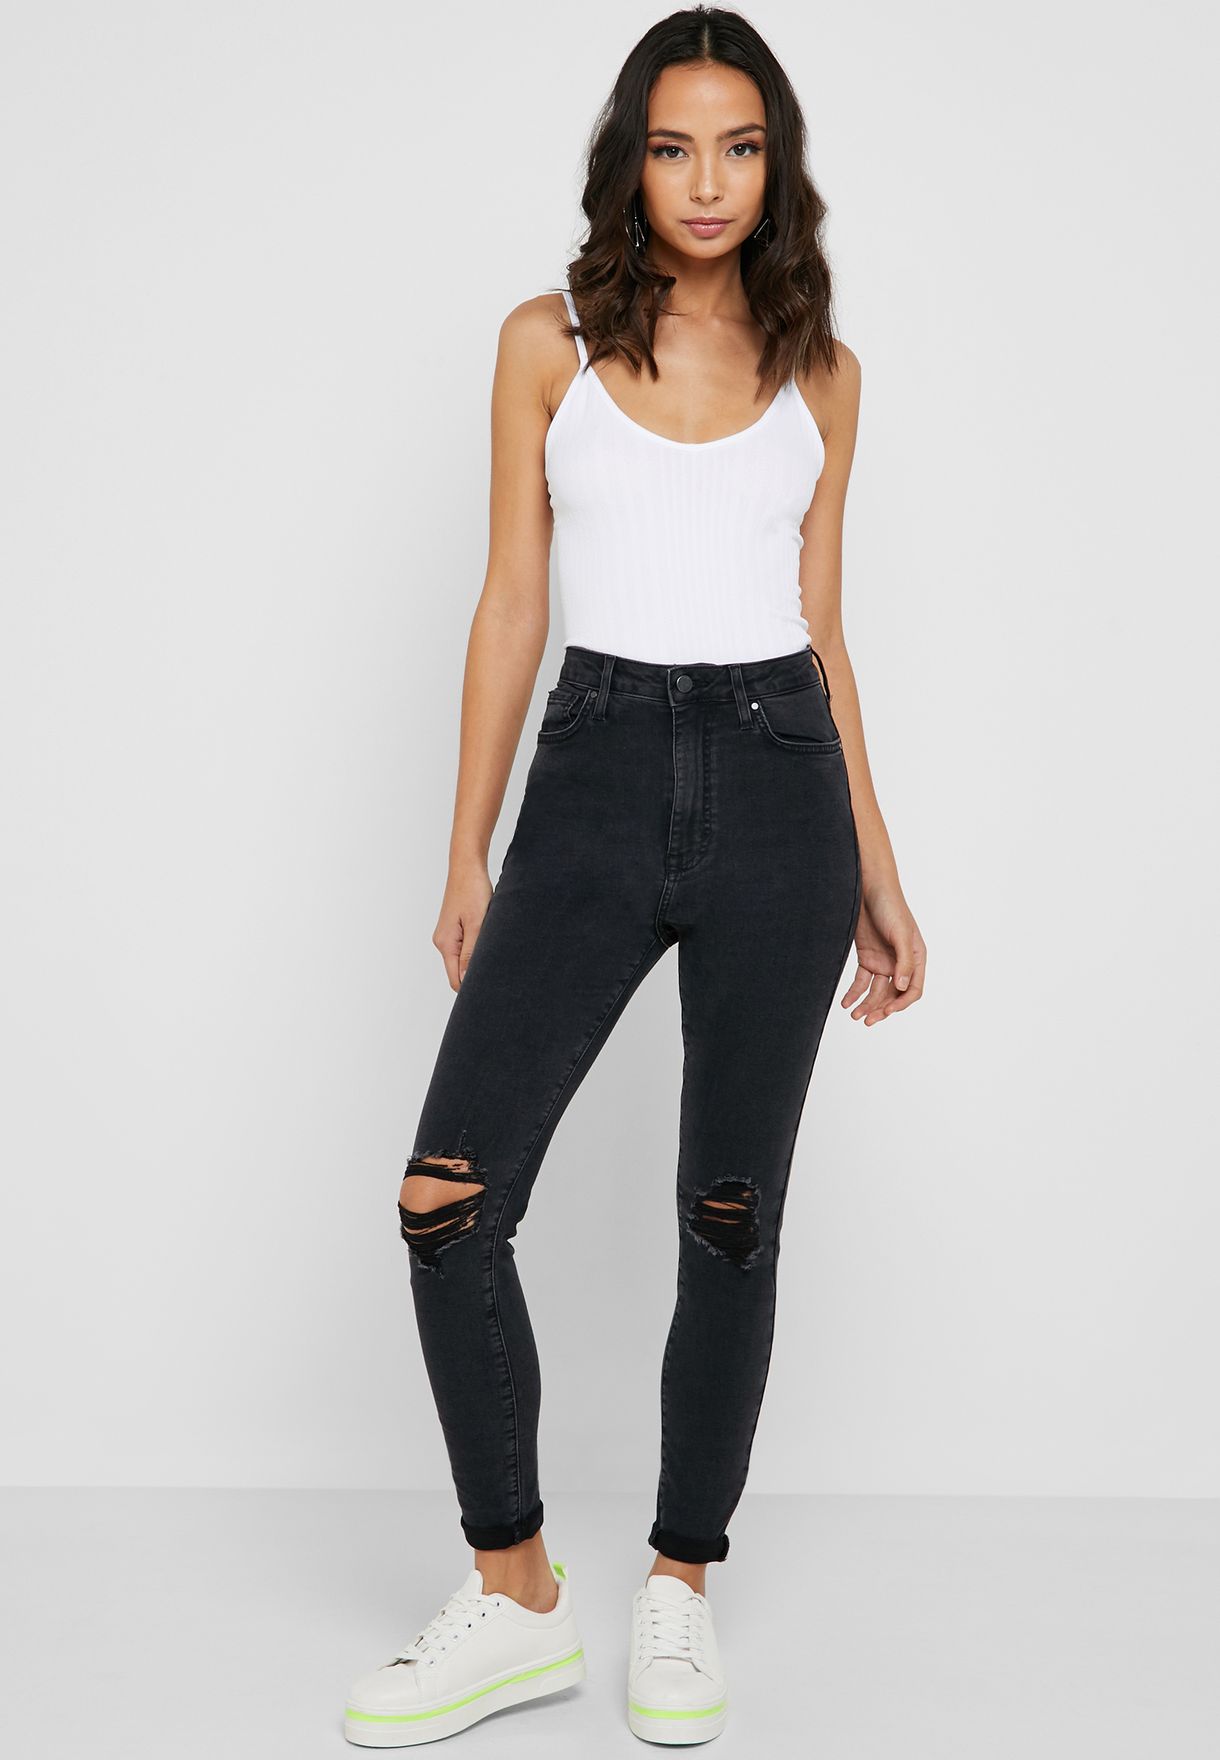 Forever 21 Women's Baggy Distressed Jeans in Light Denim, 14 | CoolSprings  Galleria